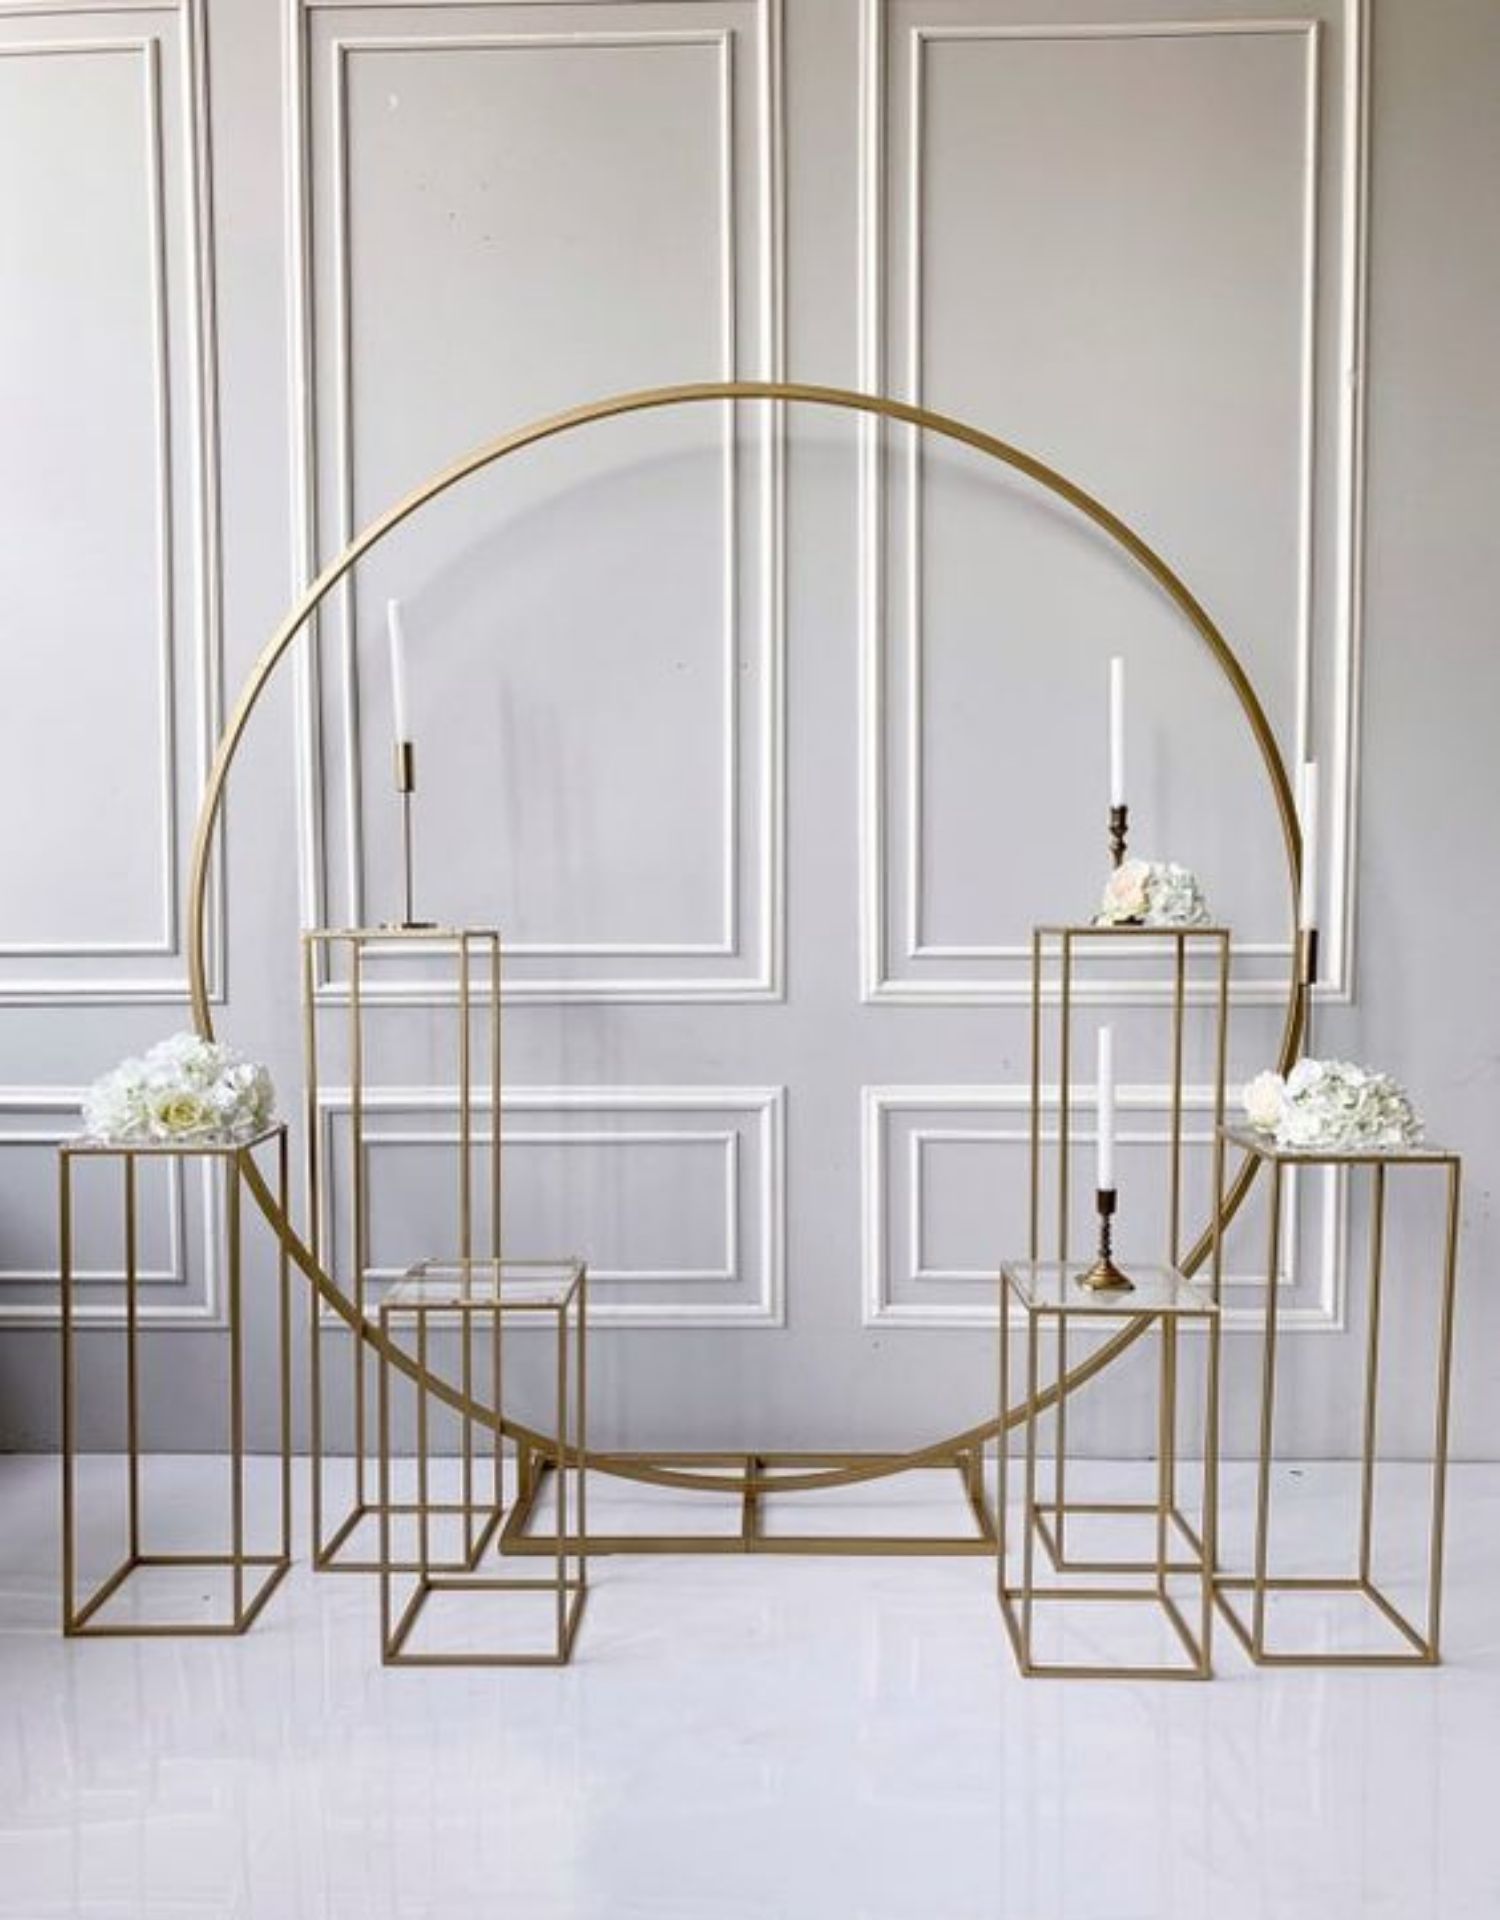 

Metal plinths grand-event geometric props wedding decoration backdrops arch outdoor lawn flowers door balloons rack iron circle Birthday Party Sash Background, Gold